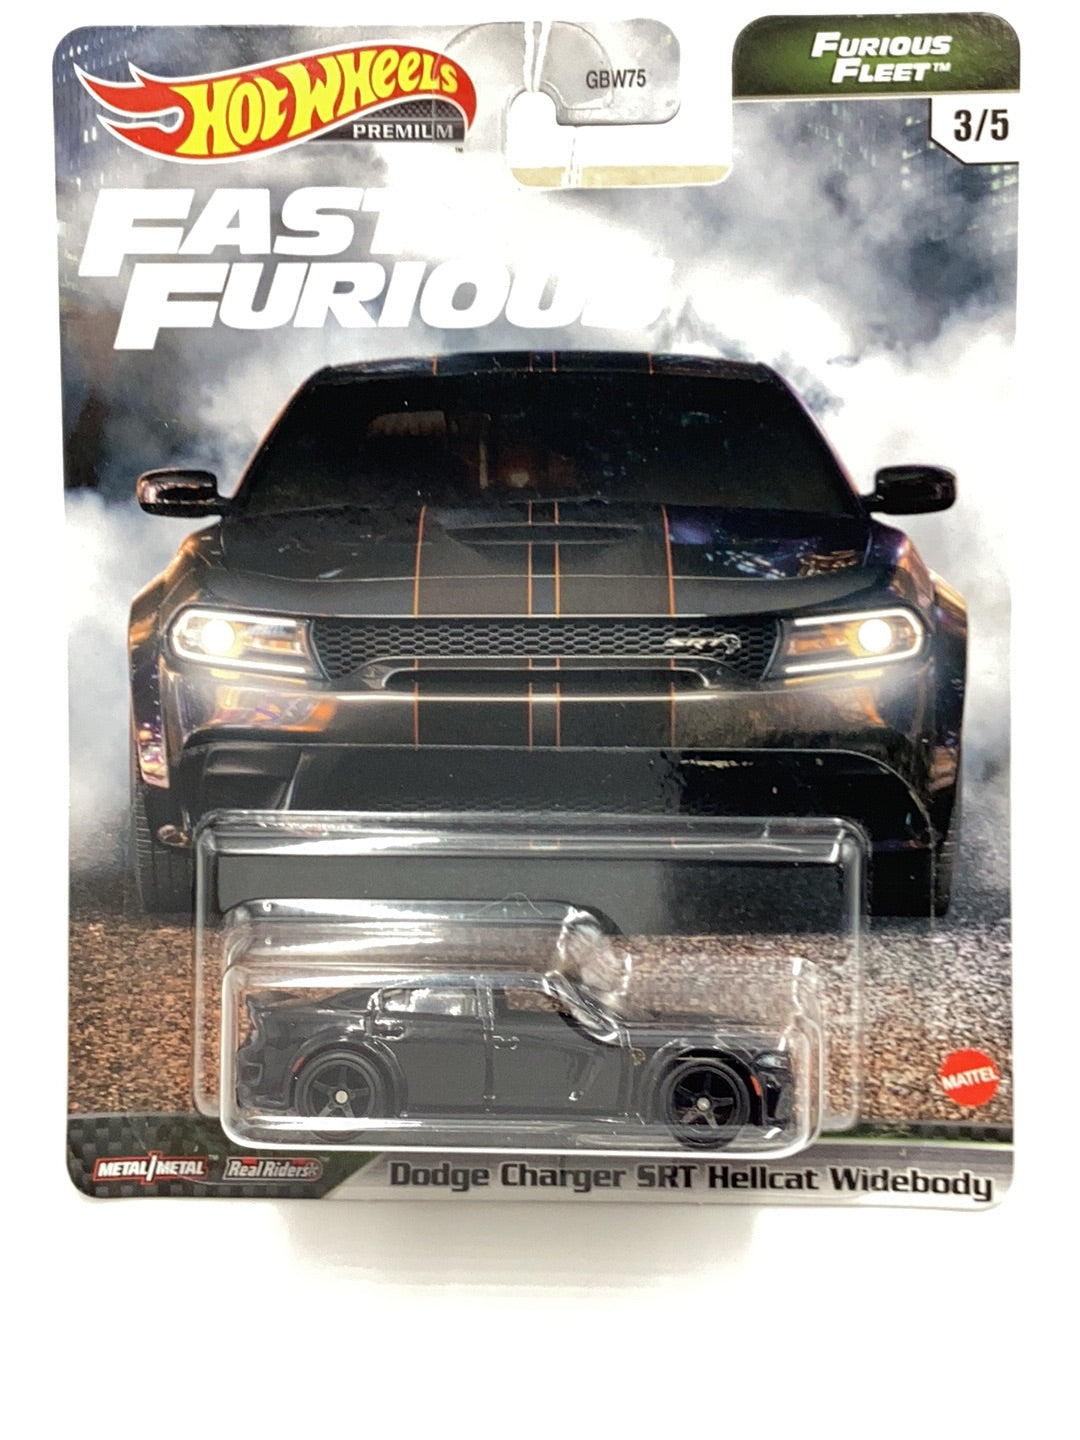 Hot Wheels fast and furious furious fleet #3 Dodge Charger SRT Hellcat Widebody 246I